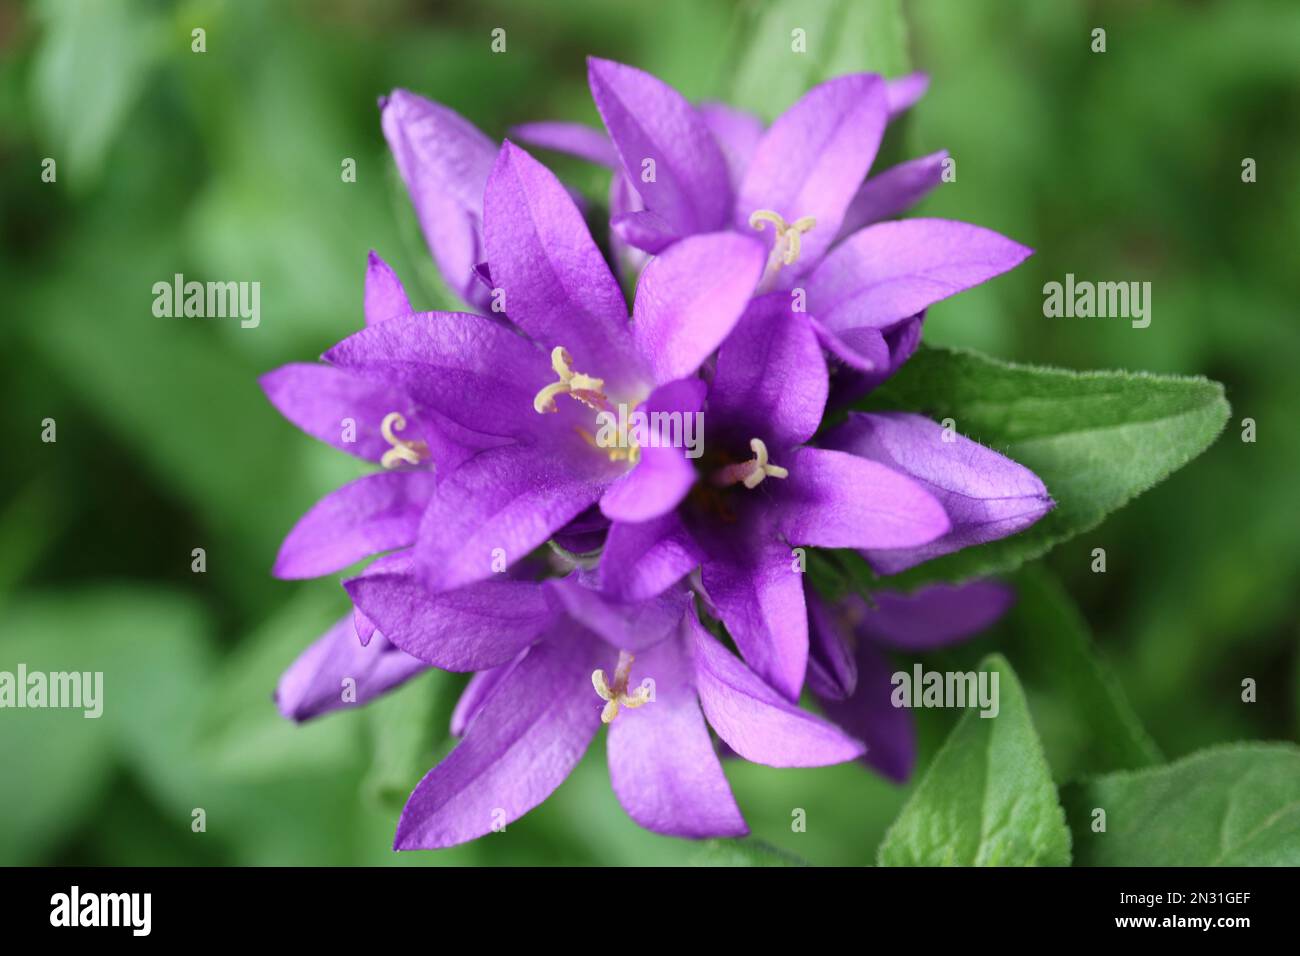 Purple Bell flowers with delicate petals and green leaves in the garden, Campanula Glomerata, purple Bell flowers macro, beauty in nature, floral phot Stock Photo